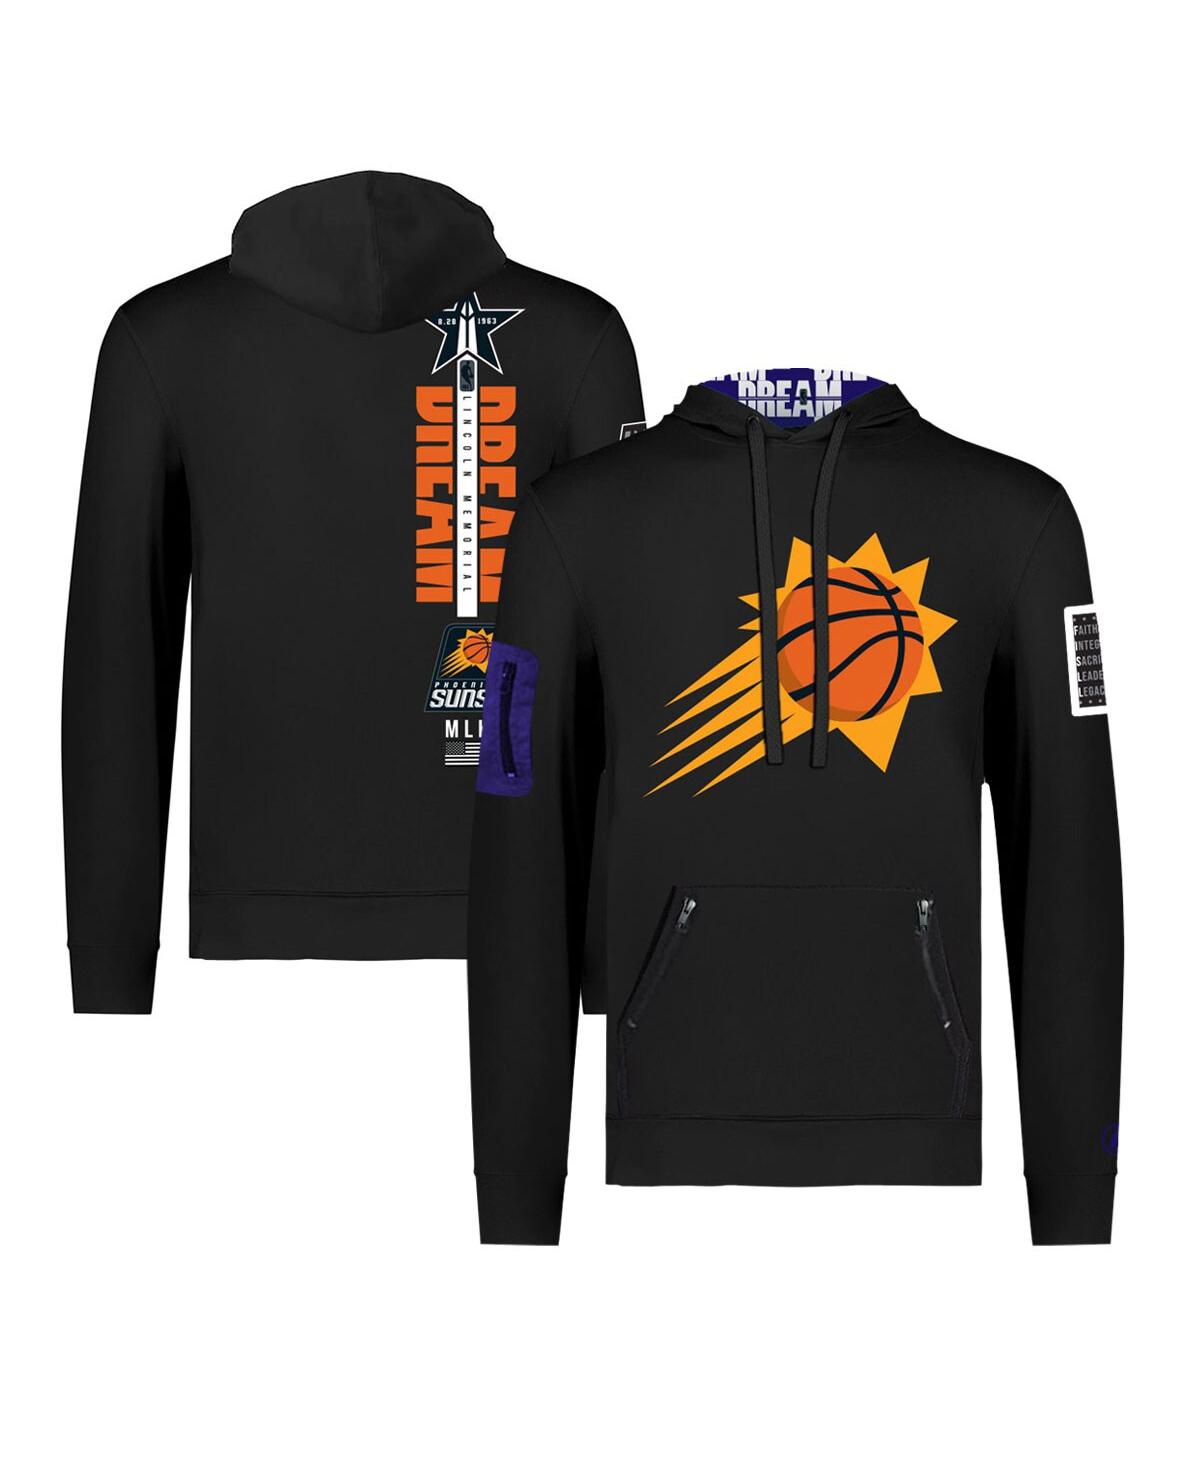 Men's and Women's Fisll x Black History Collection Black Phoenix Suns Pullover Hoodie - Black